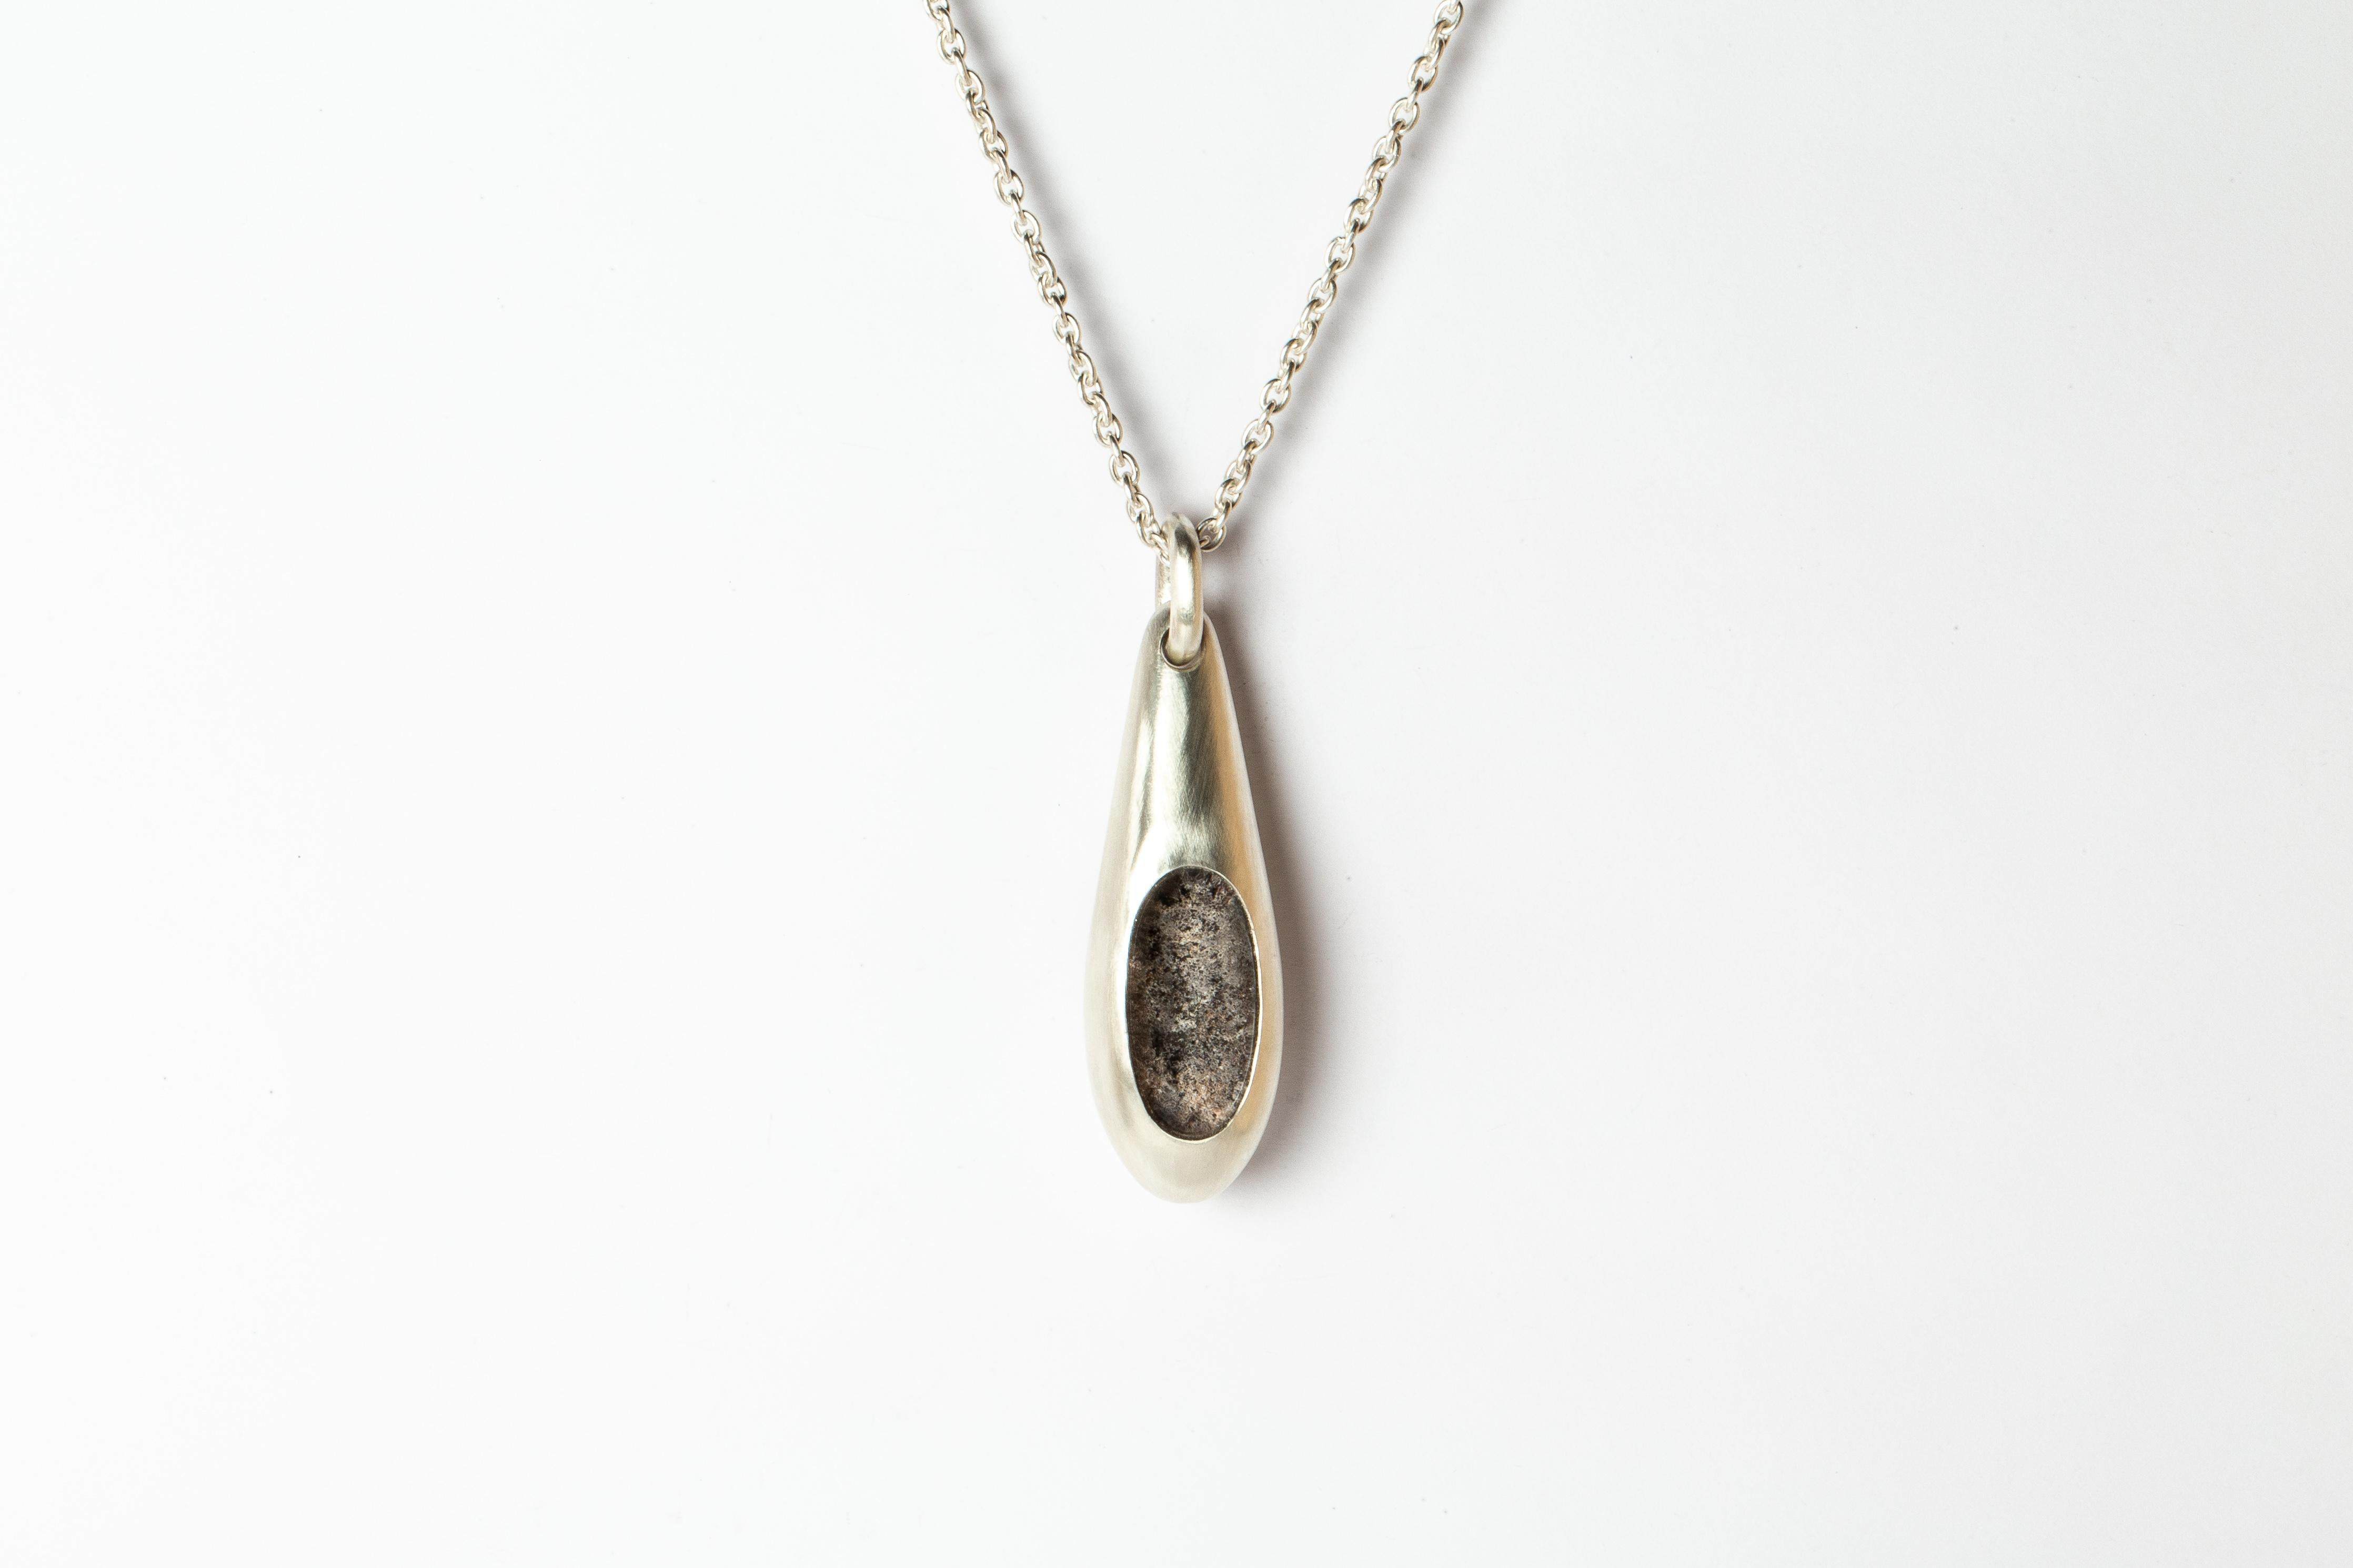 Necklace in the shape of chrysalis made in matte sterling silver and a slab of lodolite. It comes on a 74 cm sterling silver chain. Each piece a unique and this is what makes it special.